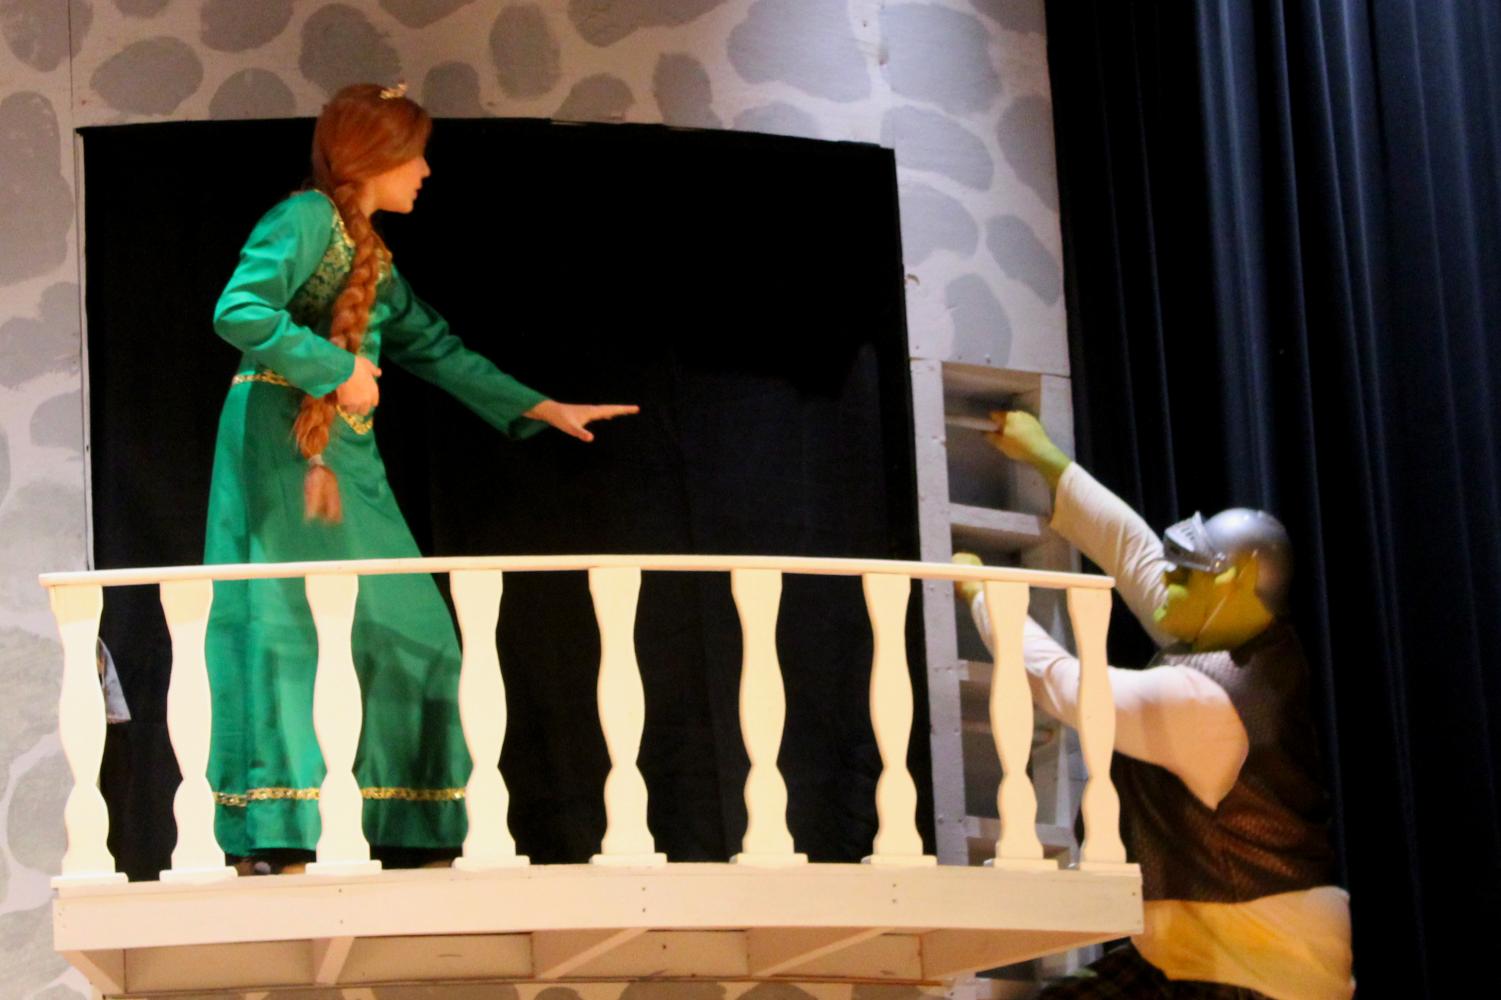 Shrek+The+Musical+Takes+Stage